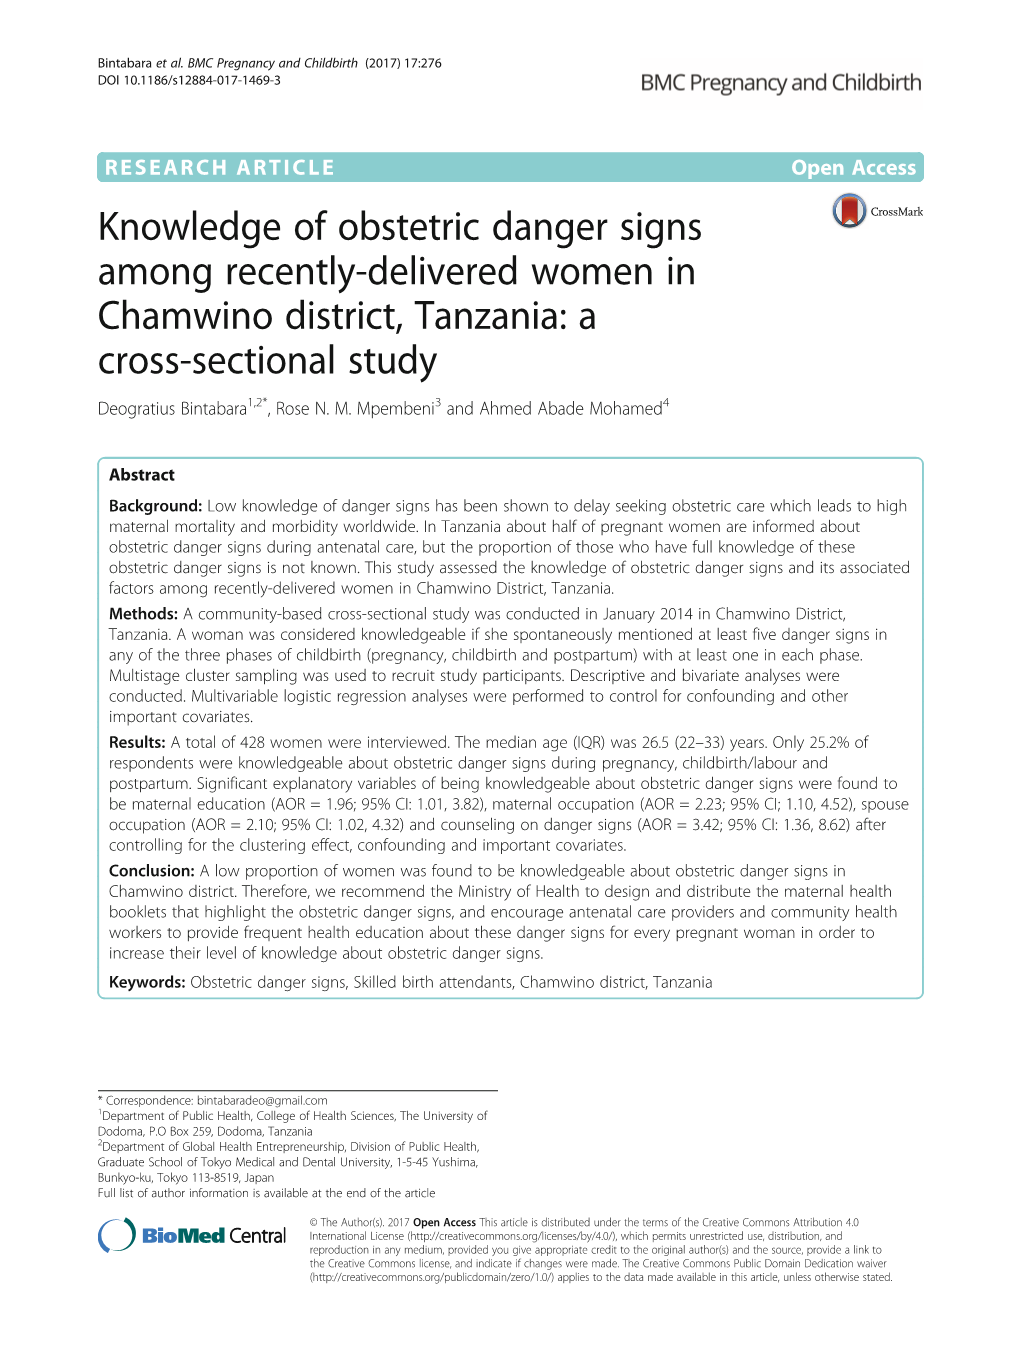 Knowledge of Obstetric Danger Signs Among Recently-Delivered Women in Chamwino District, Tanzania: a Cross-Sectional Study Deogratius Bintabara1,2*, Rose N